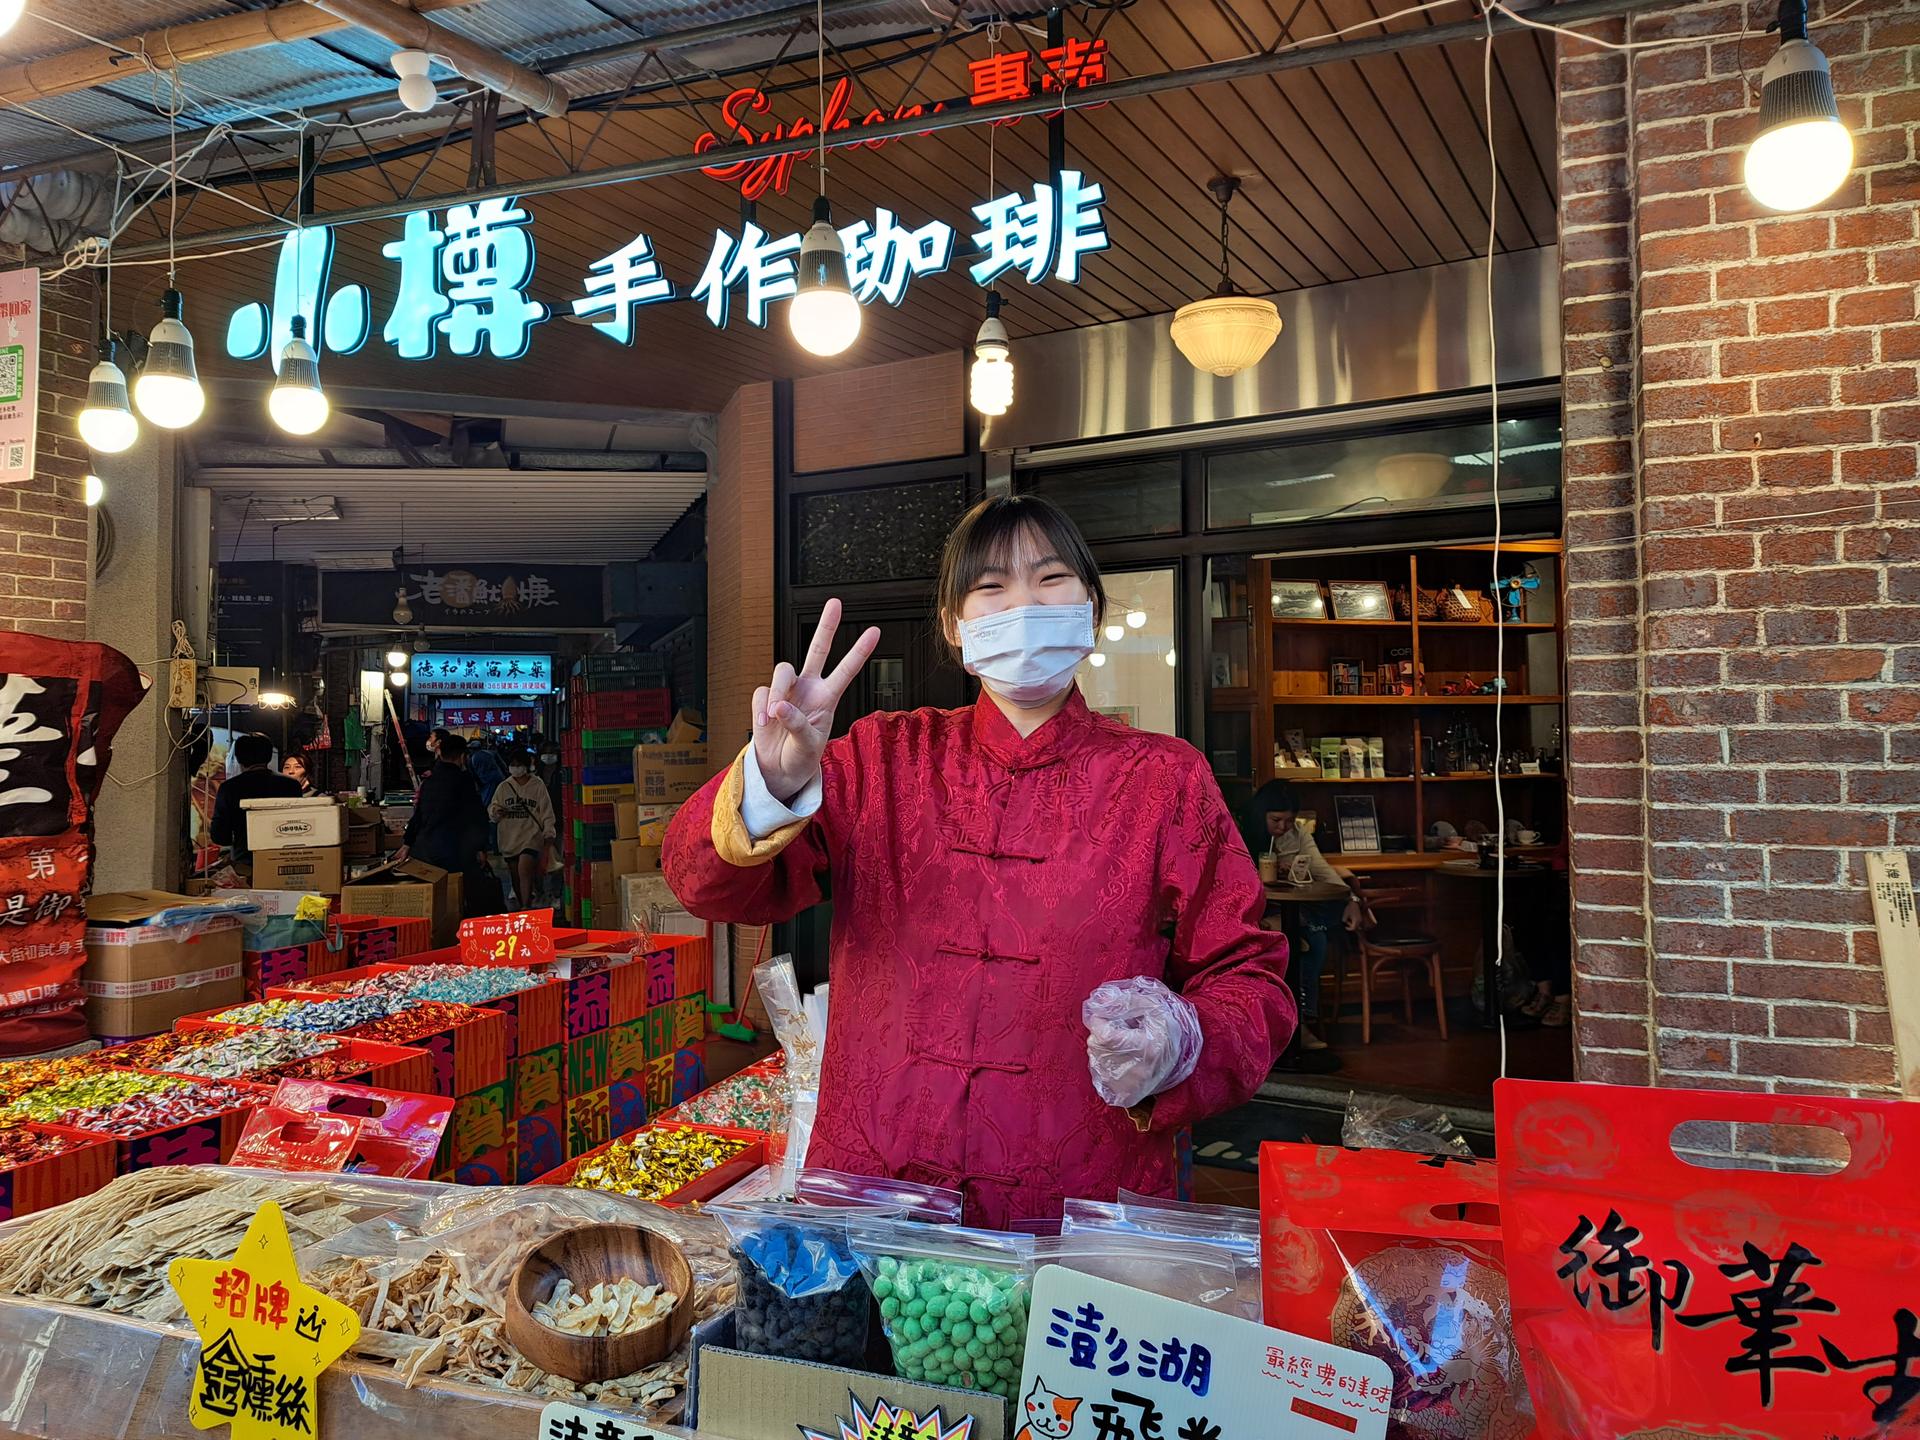 Lin Yu-San sells traditional snacks on Dihua Street. She says more people are visiting the street this year thanks to fewer concerns about COVID-19.